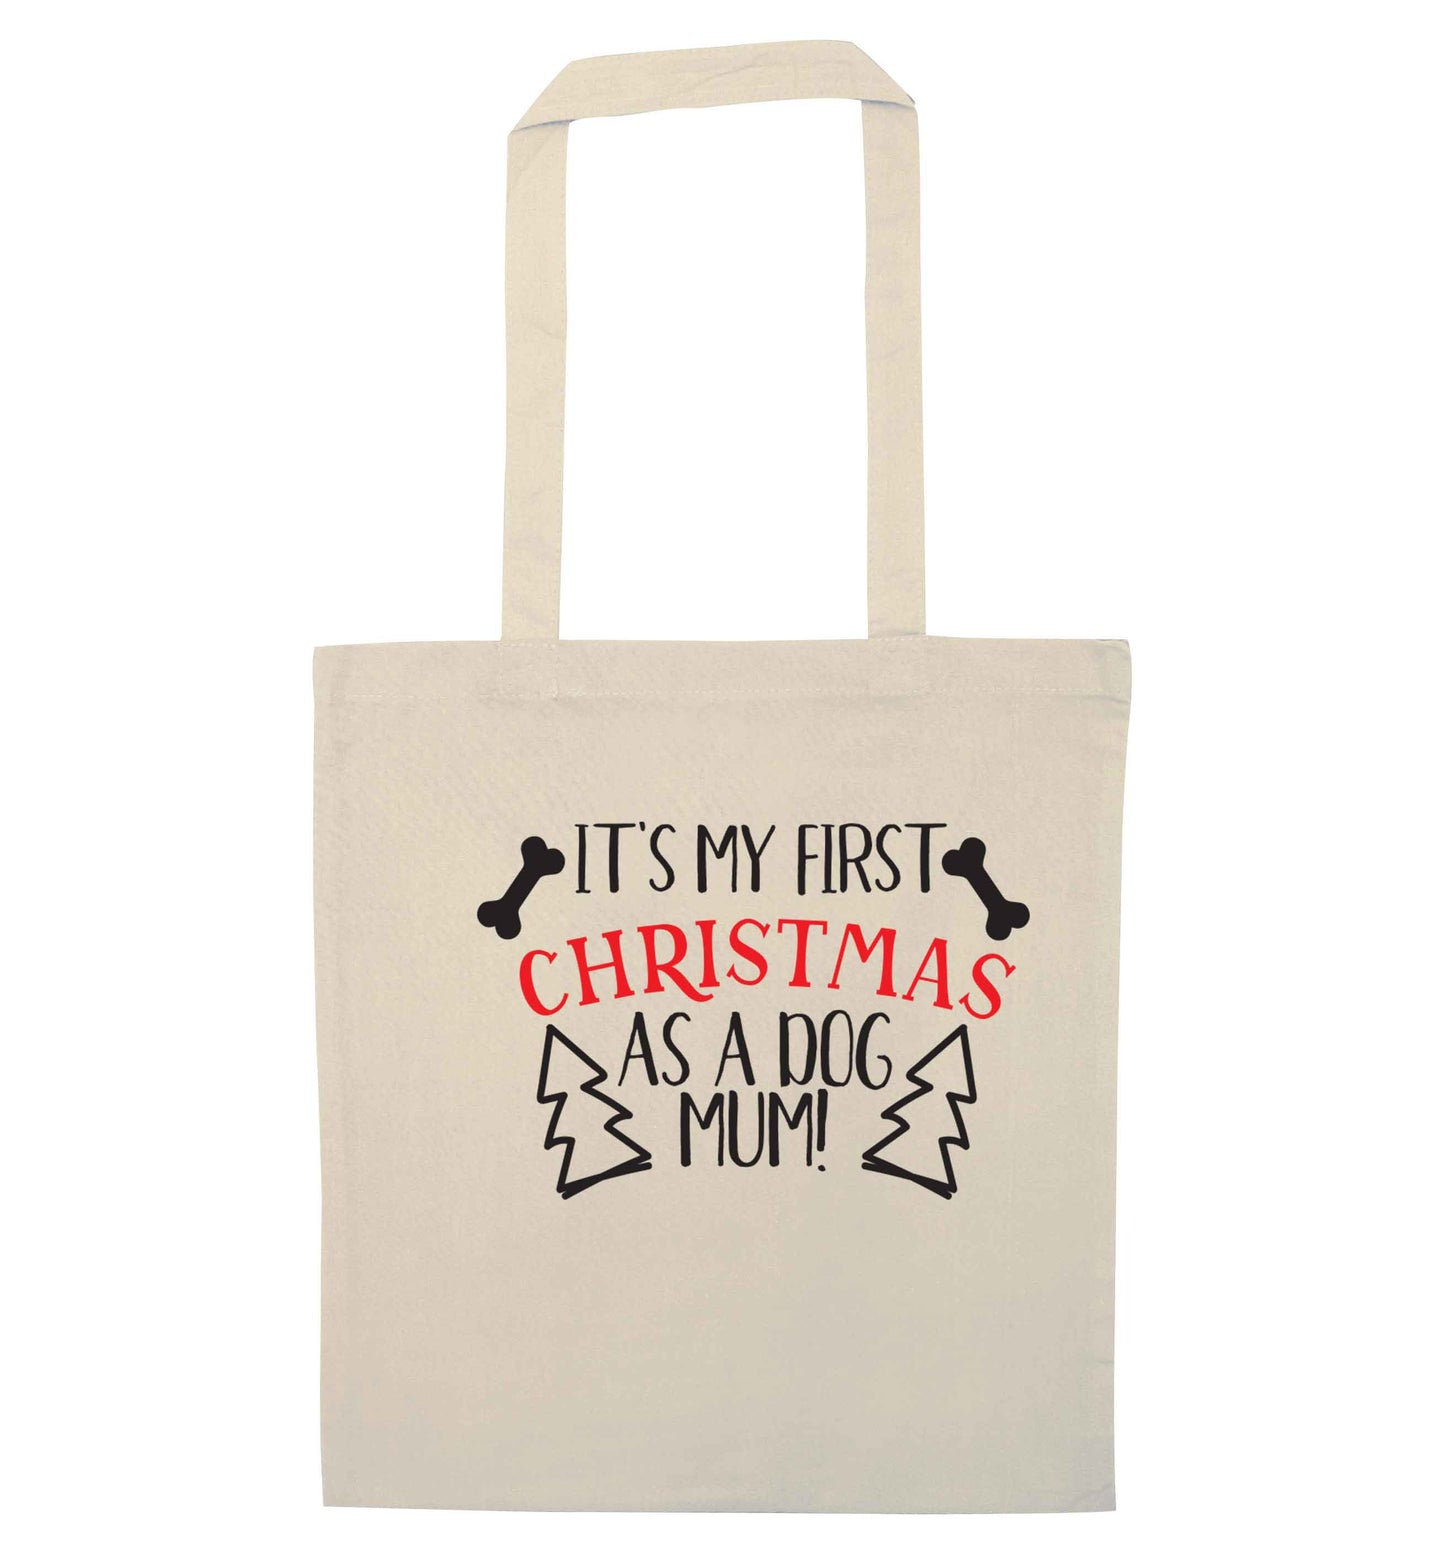 It's my first Christmas as a dog mum! natural tote bag